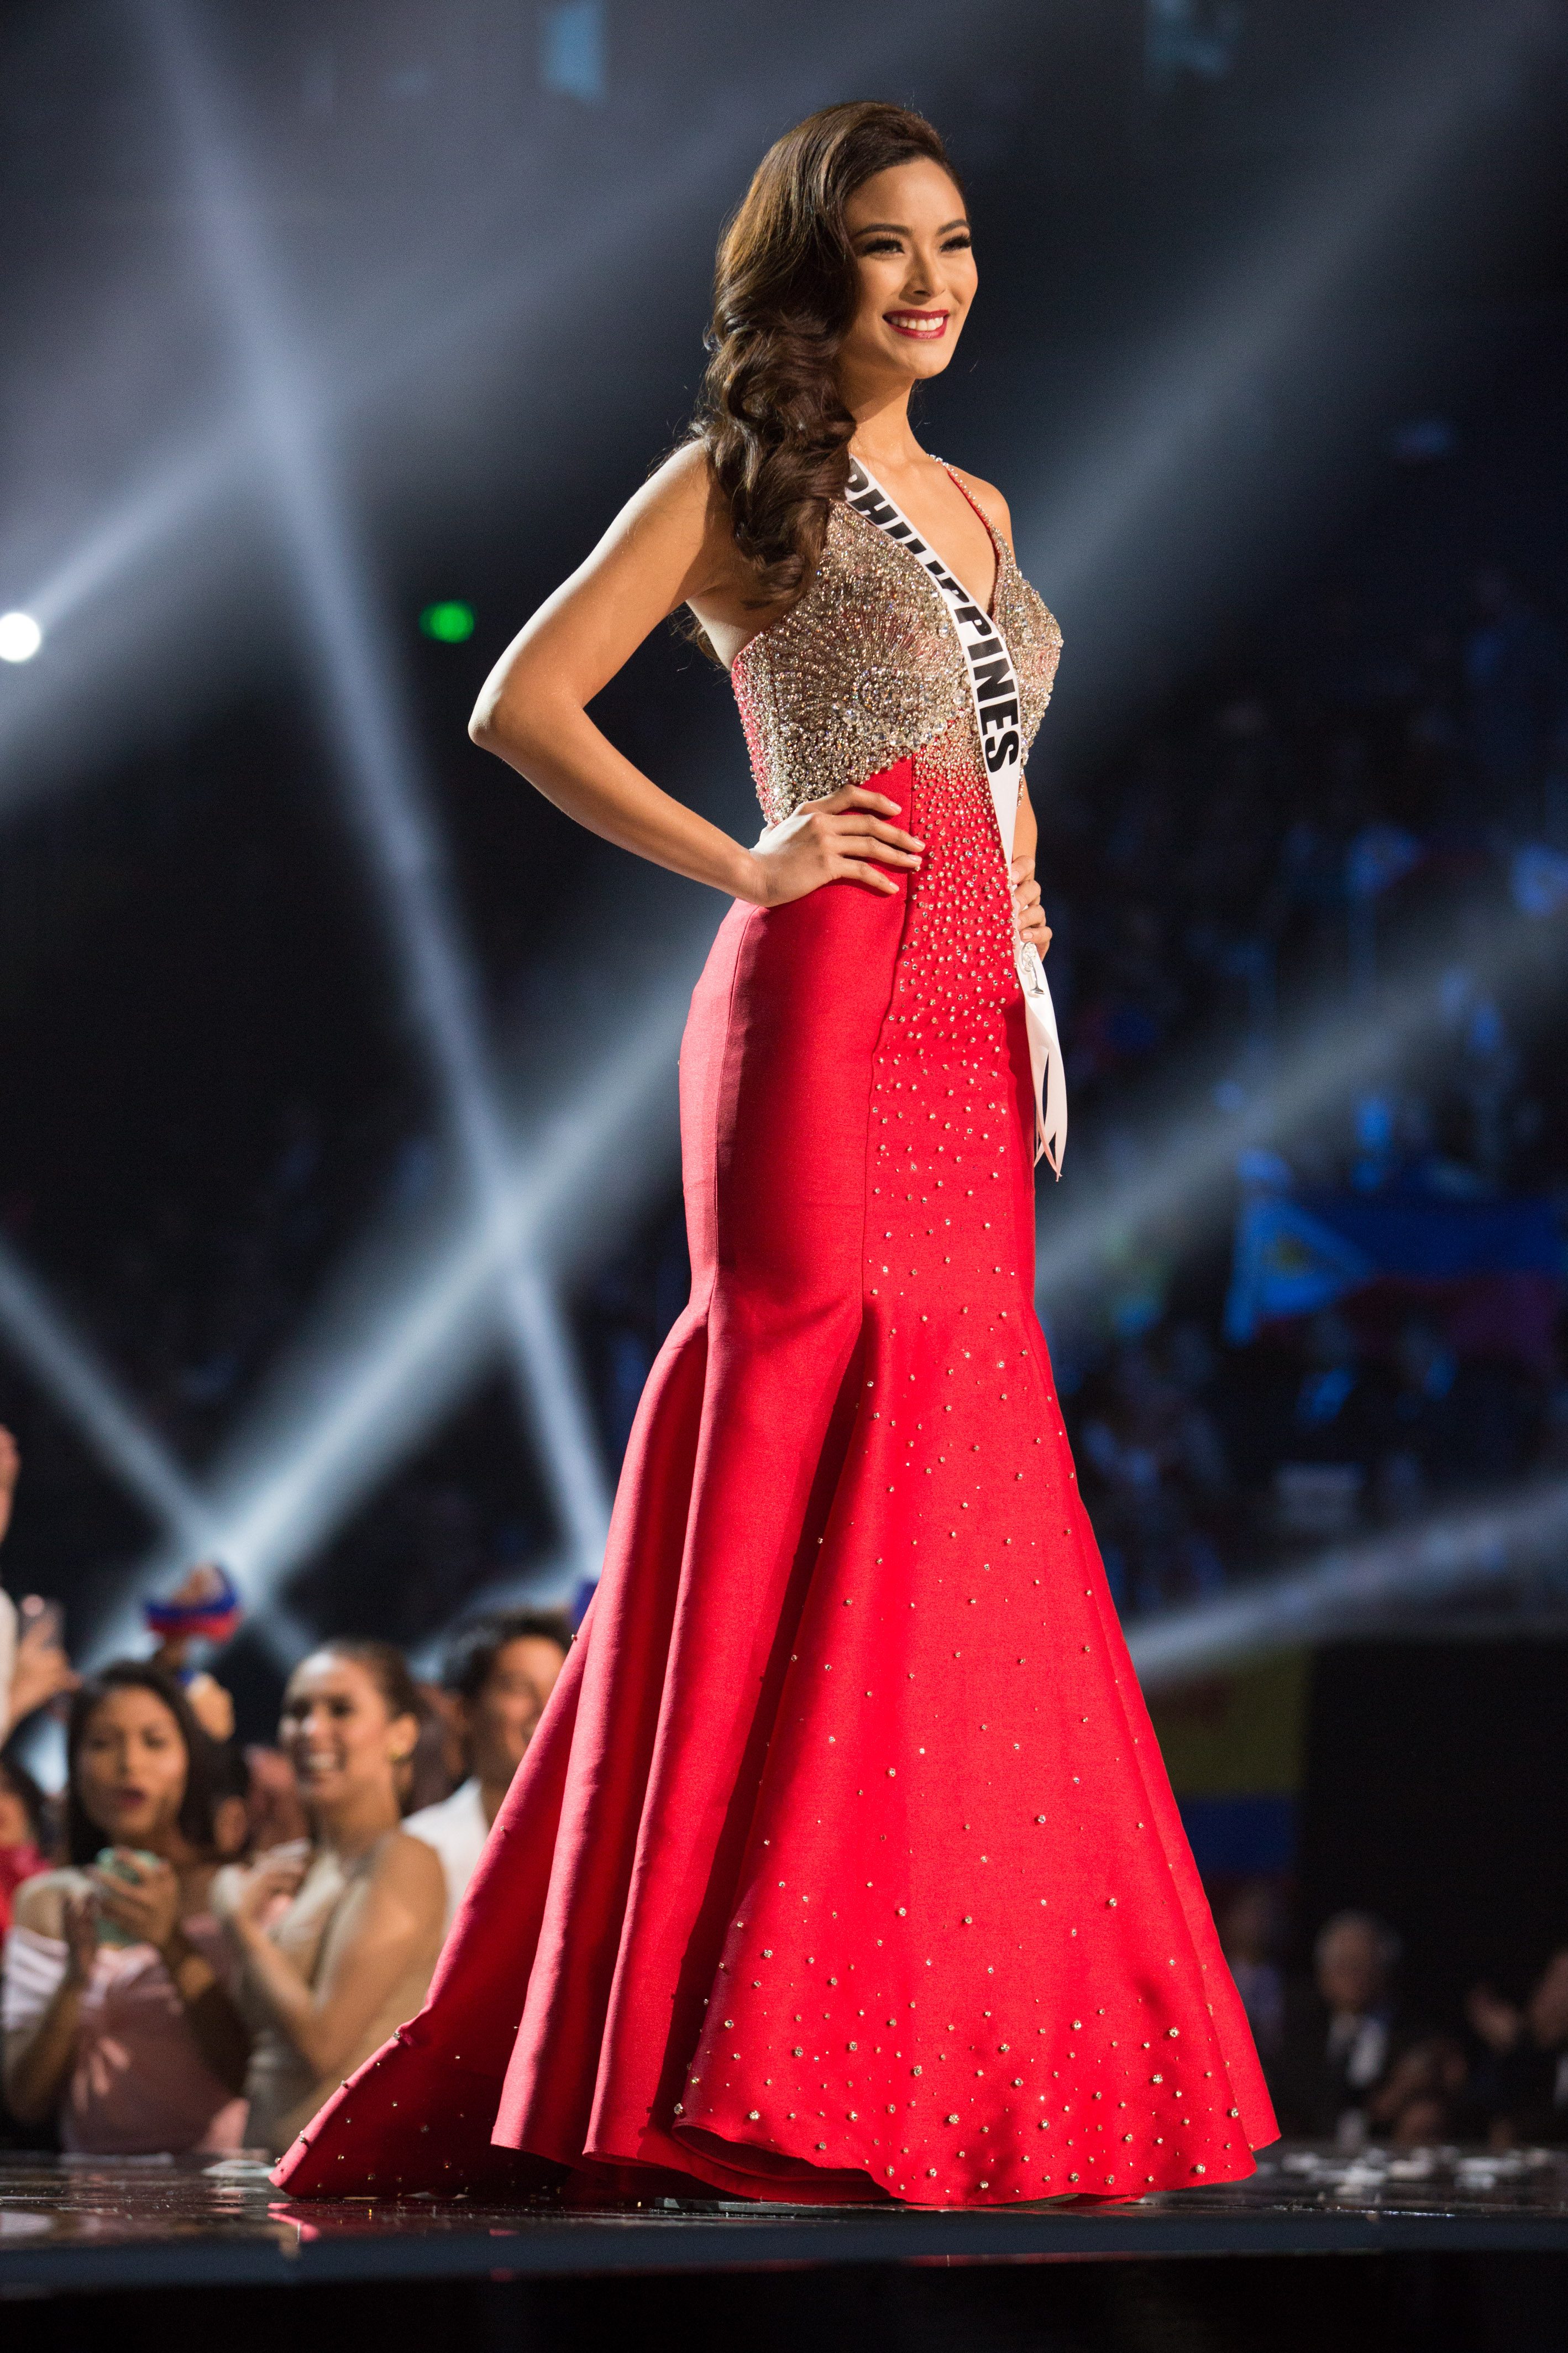 TOP 6 FINALIST. The Philippines' Maxine Medina is announced as a Top 6 finalist during the Miss Universe 2016 pageant. Photo from HO/The Miss Universe Organization  